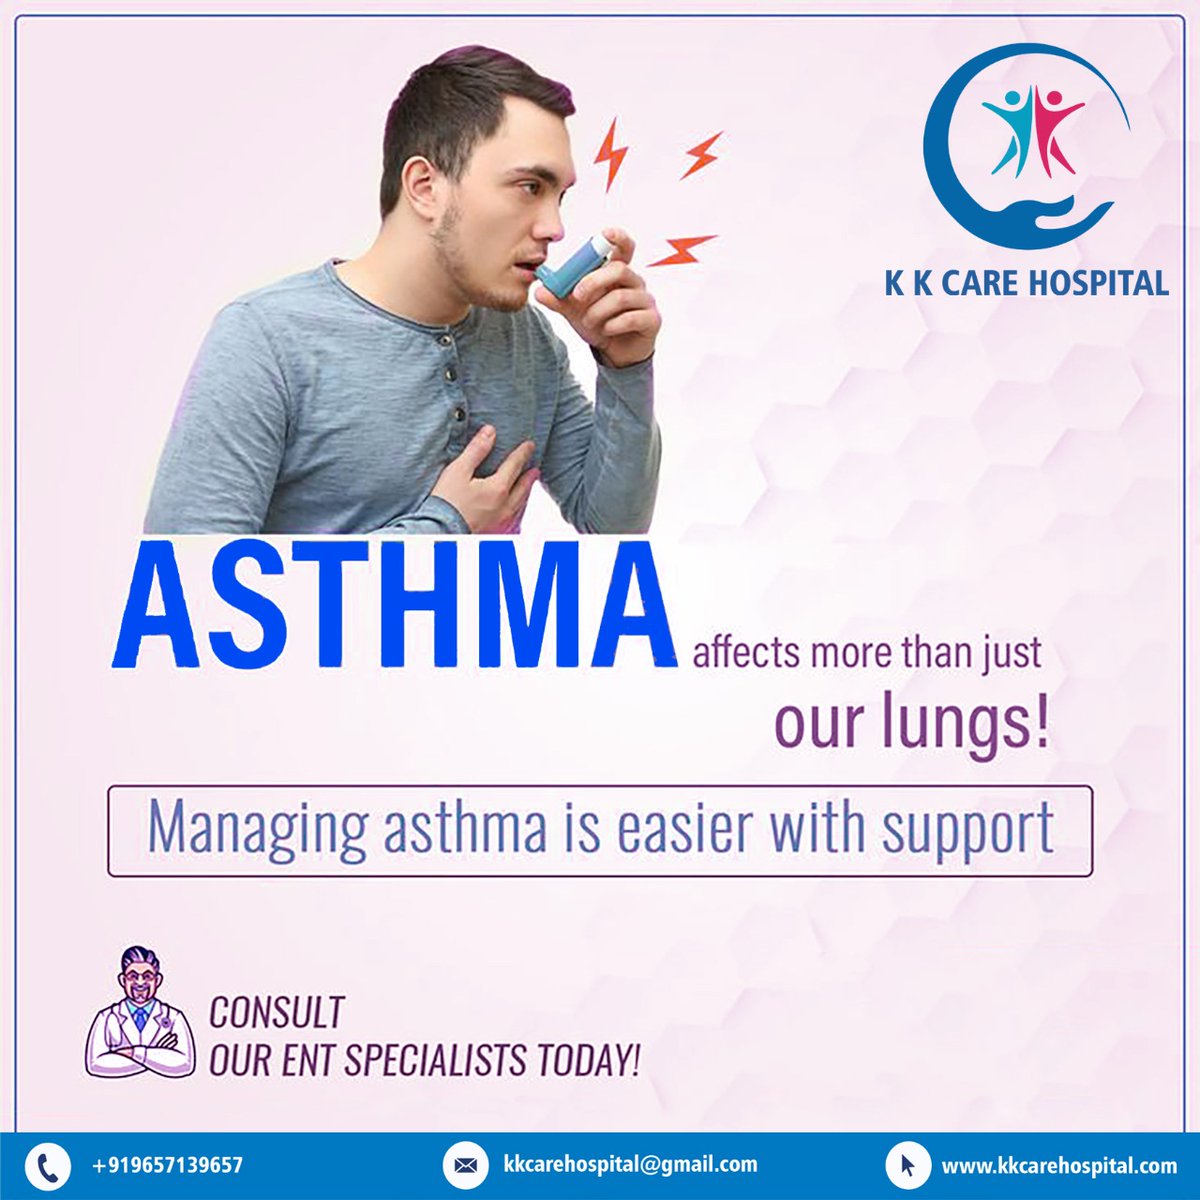 Asthma affects more than just your lungs!

#asthma #asthmatic #asthmaattack #asthmasucks #asthmalife #asthmaawareness #asthmatreatment #asthmaworkaround #asthmaprobs #asthmafriendly #asthmacantstopme #asthmacat #asthmatics #asthmacansuckit #asthmasolutions #asthmaremedies